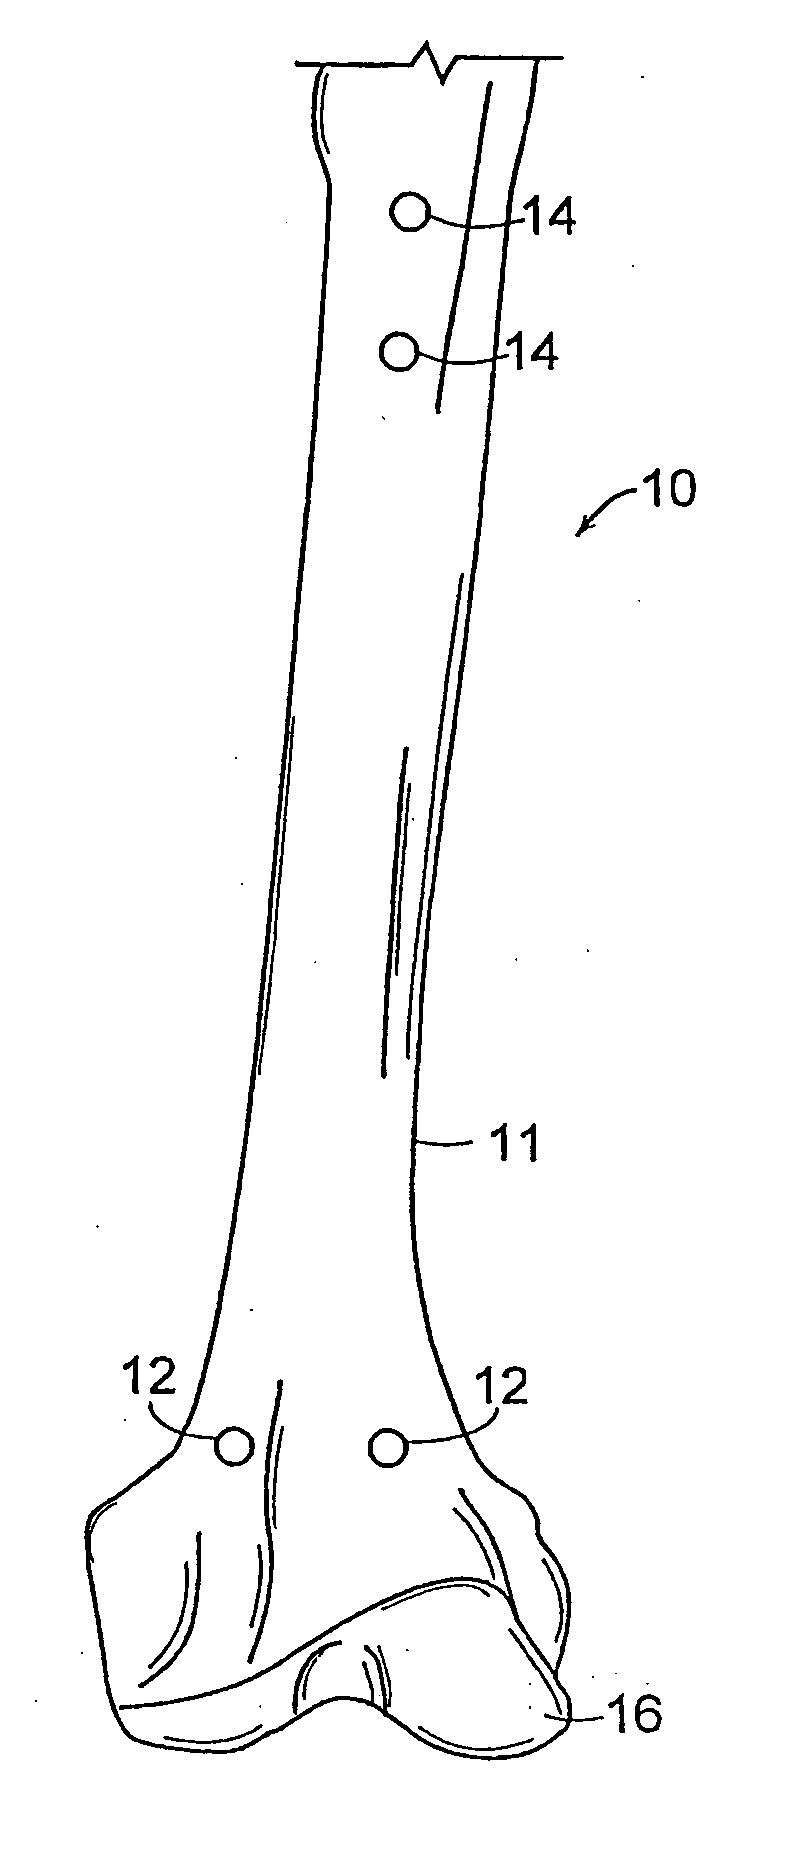 Systems and methods for producing osteotomies